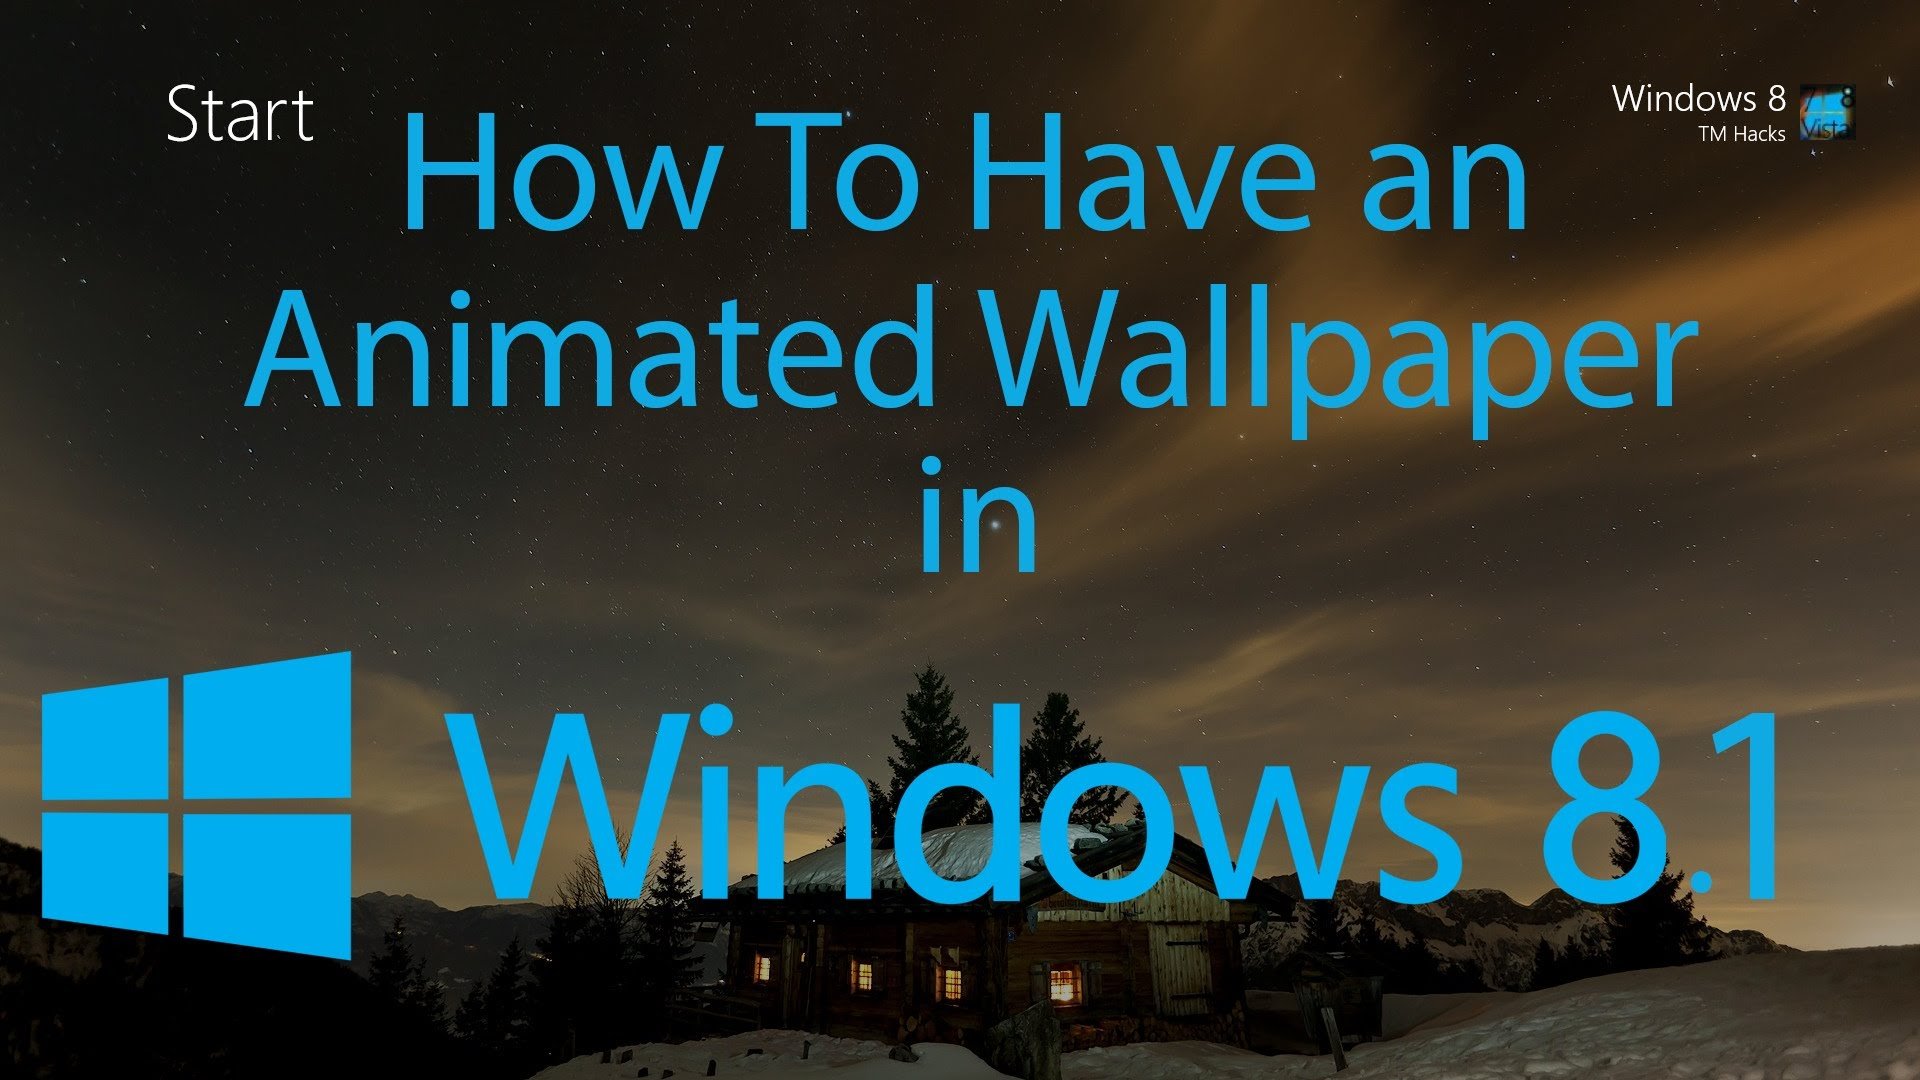 How To Have an Animated Wallpaper in Windows 81 1920x1080